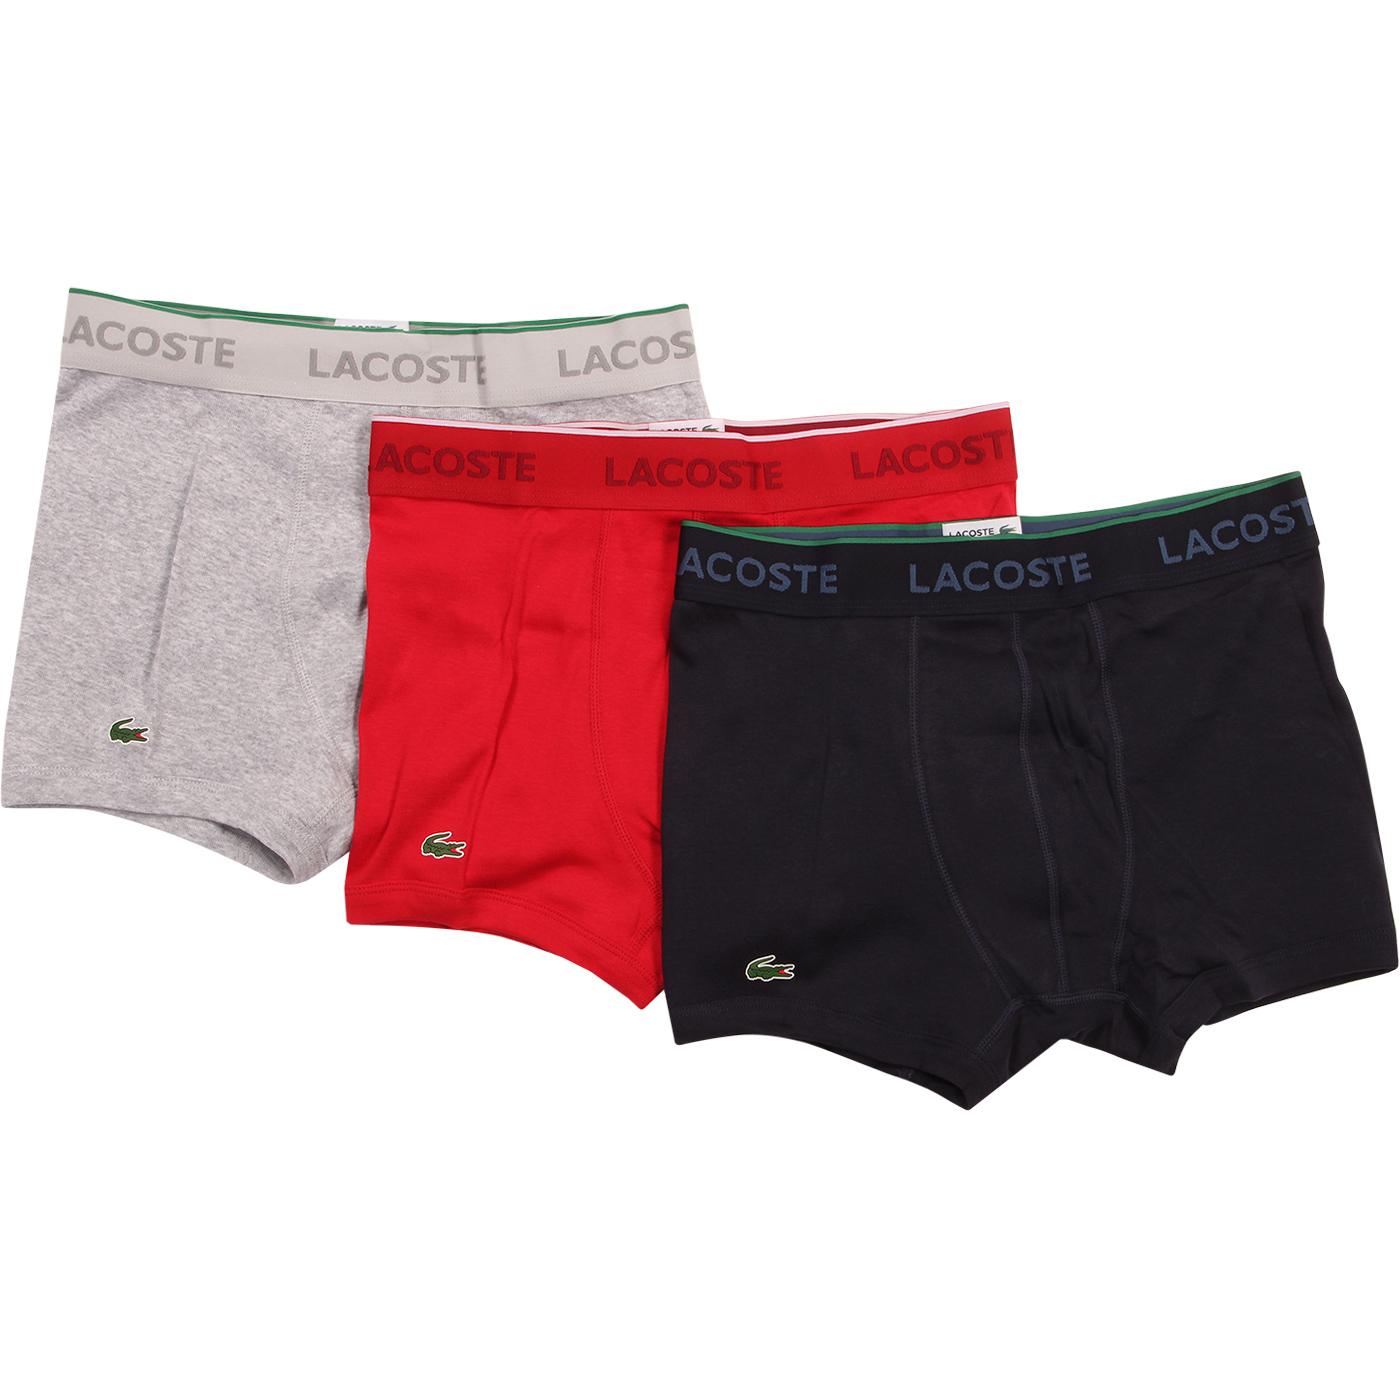 + LACOSTE Mens Signature 3 Pack Trunks in Red/Grey/Navy